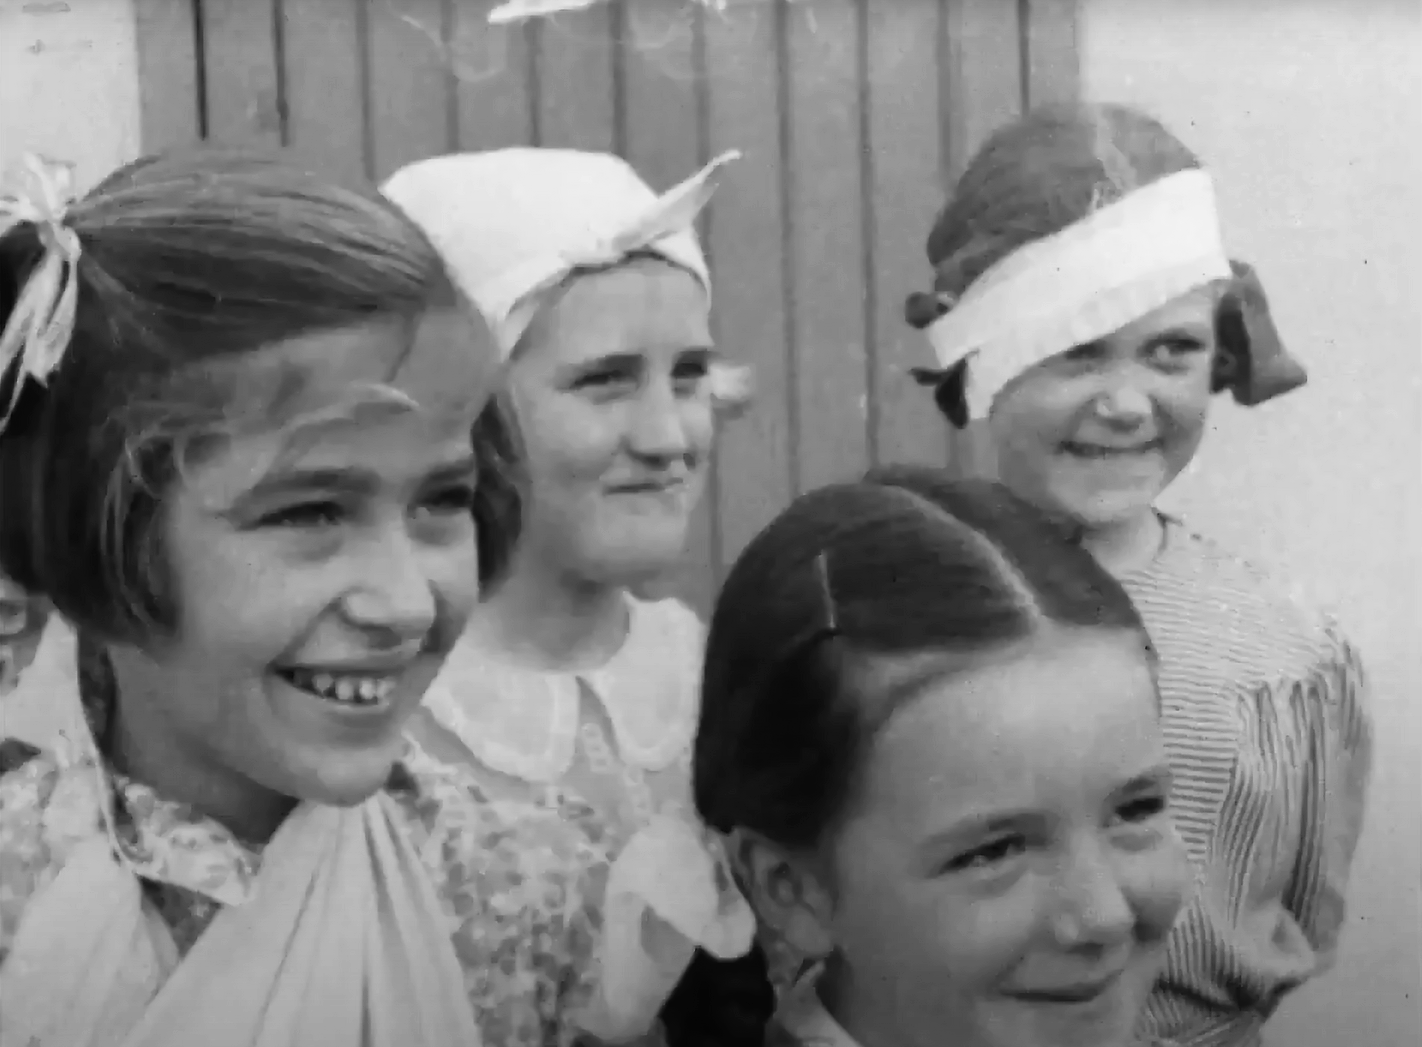 Still from the film The Case of the Disappearing School